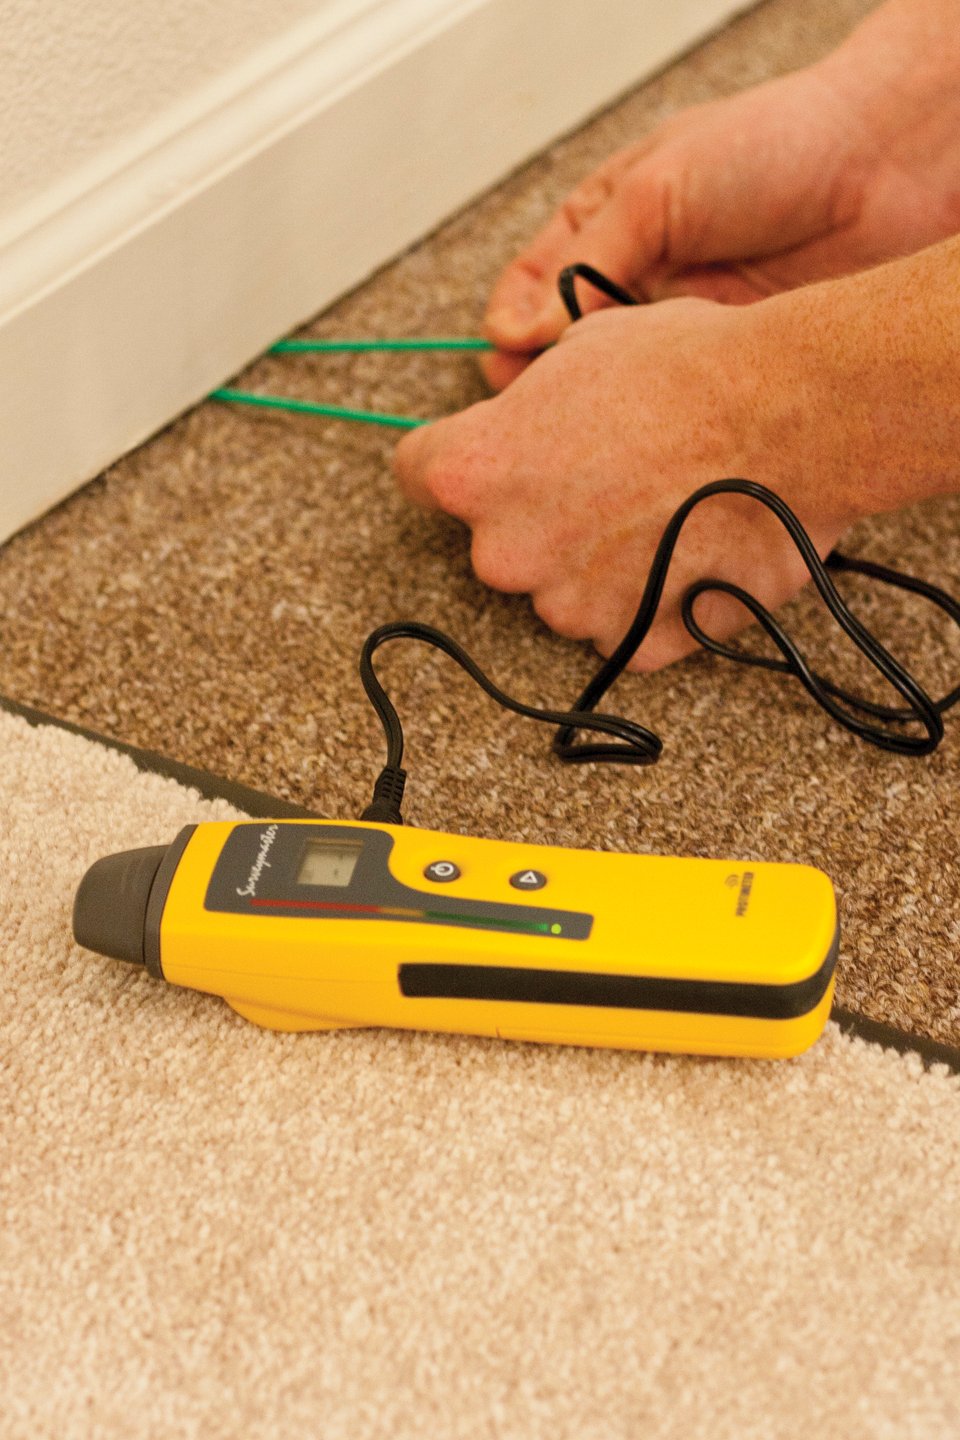 Your Professional Moisture Meter’s Not Working -- Why?